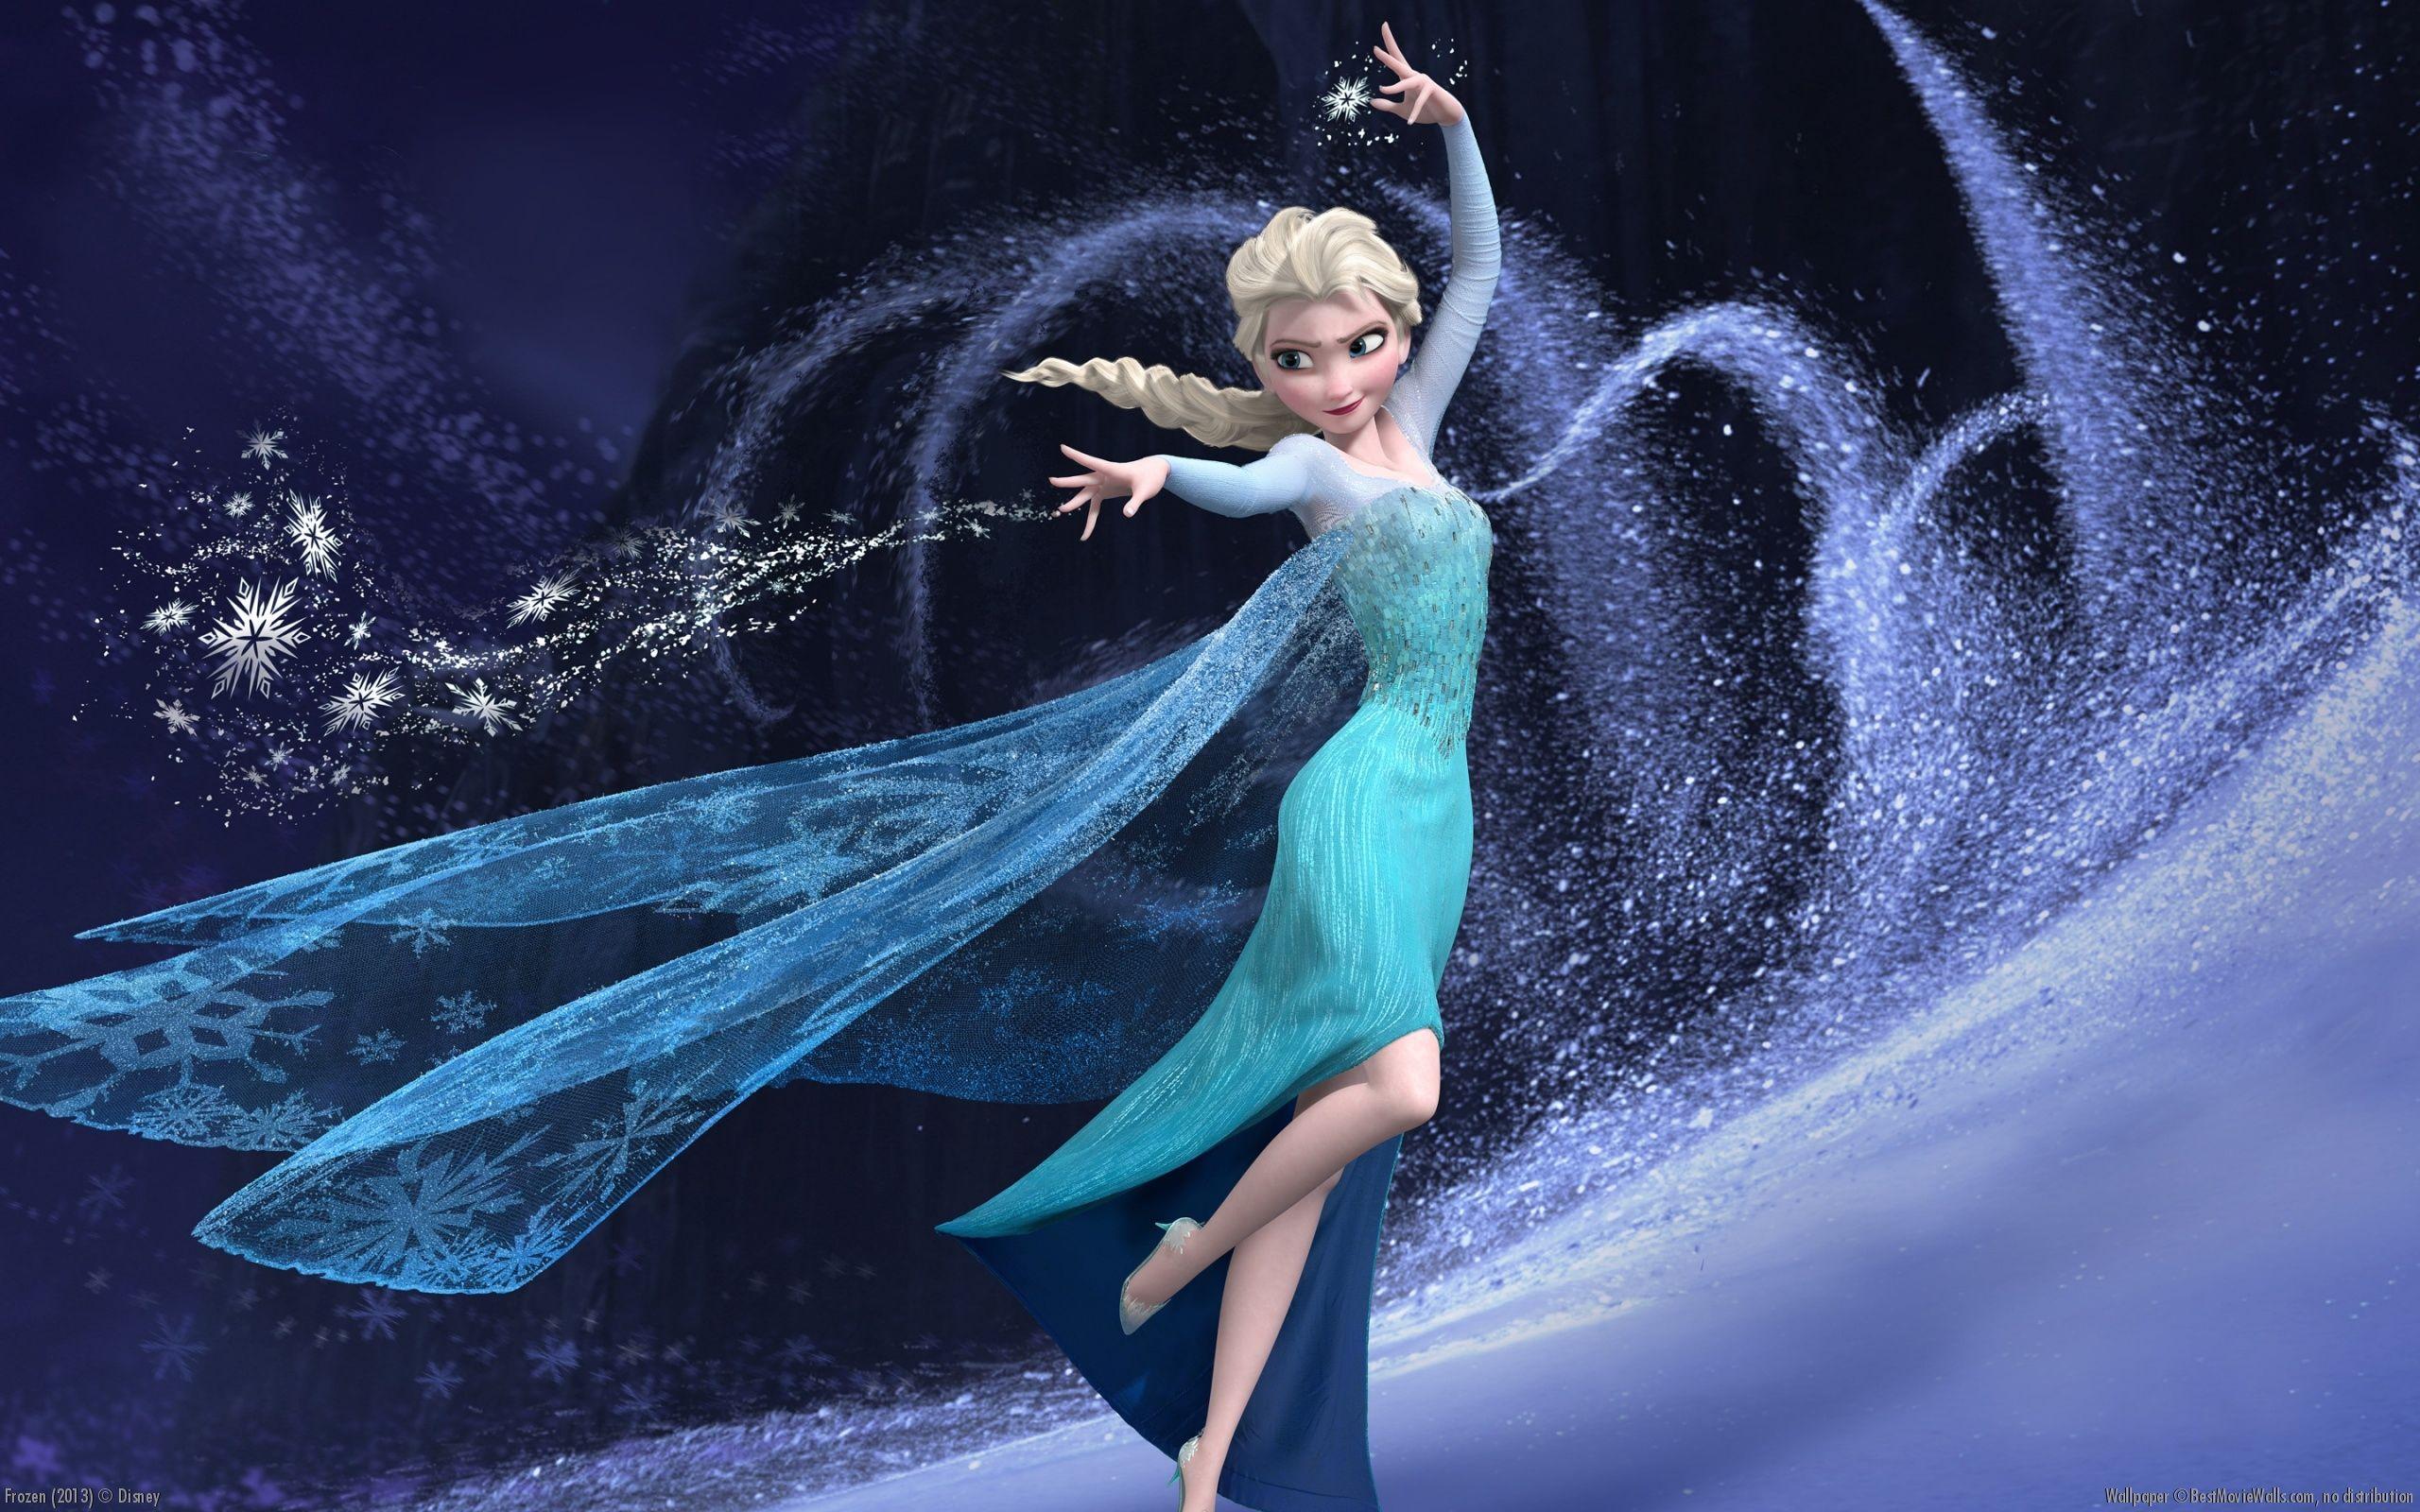 The Most Amazing & Best 'Frozen' Wallpaper On The Web